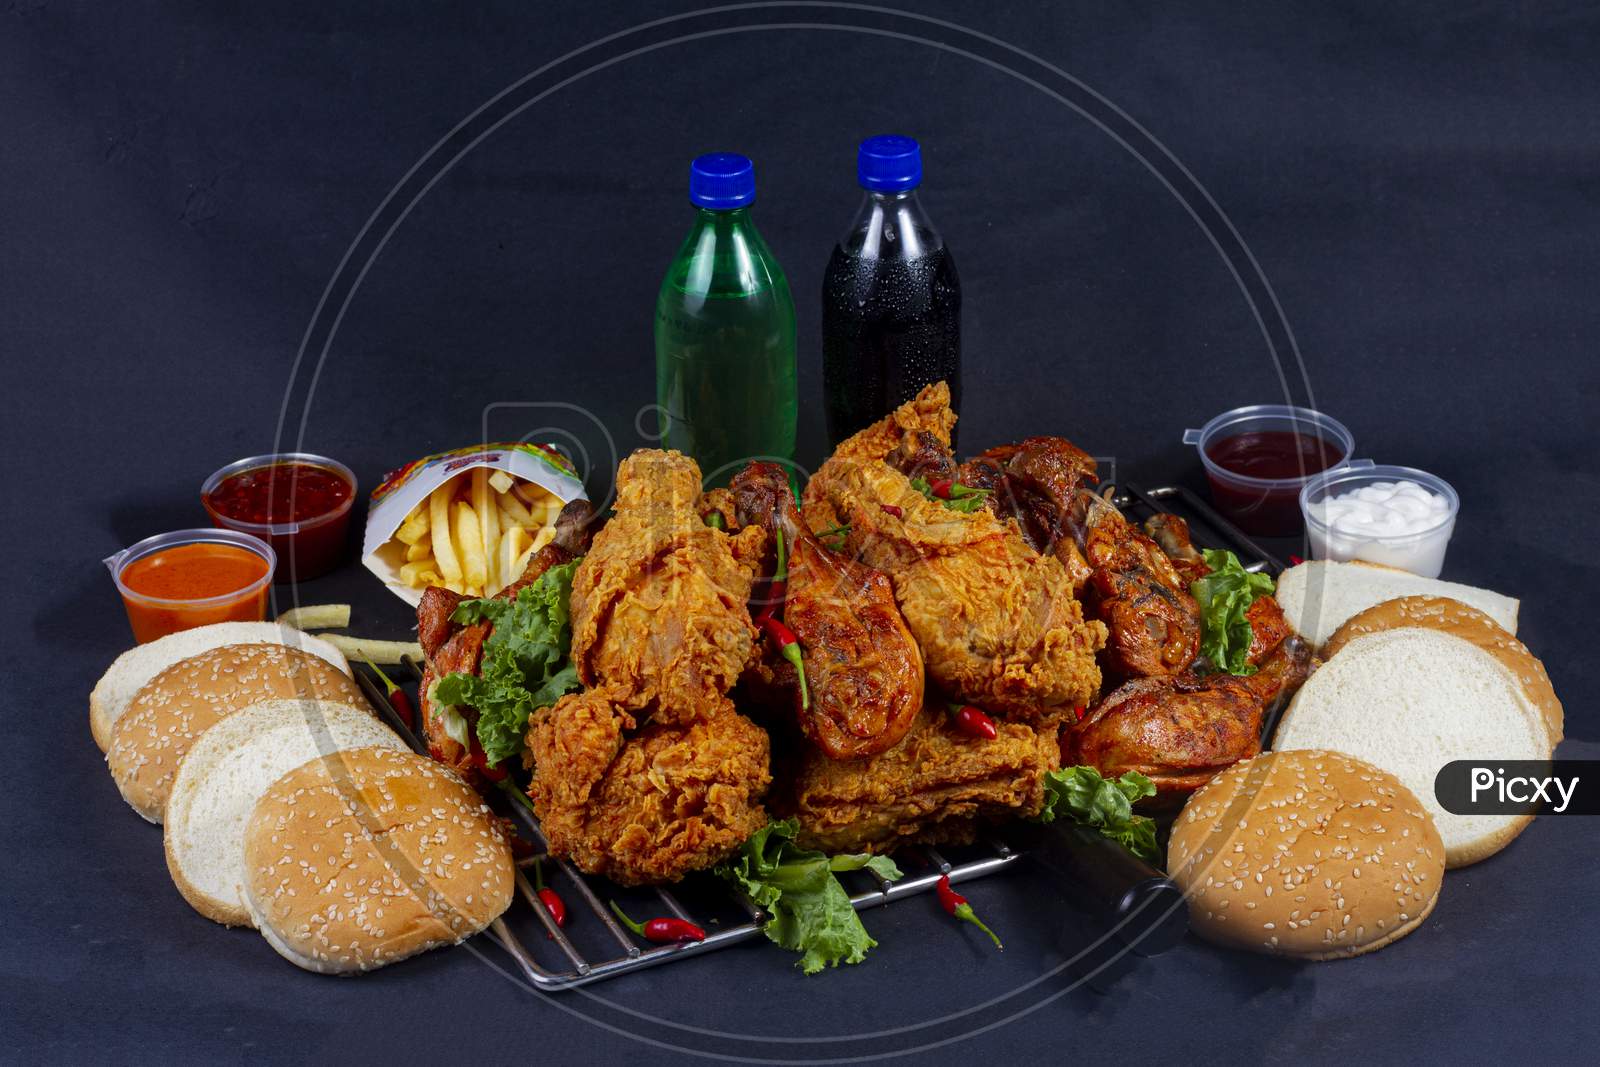 Hot And Crispy Fried Chicken Legs And Grilled Chicken Legs Isolated On A Grill Platter.French Fries, Cold Drink And In Background